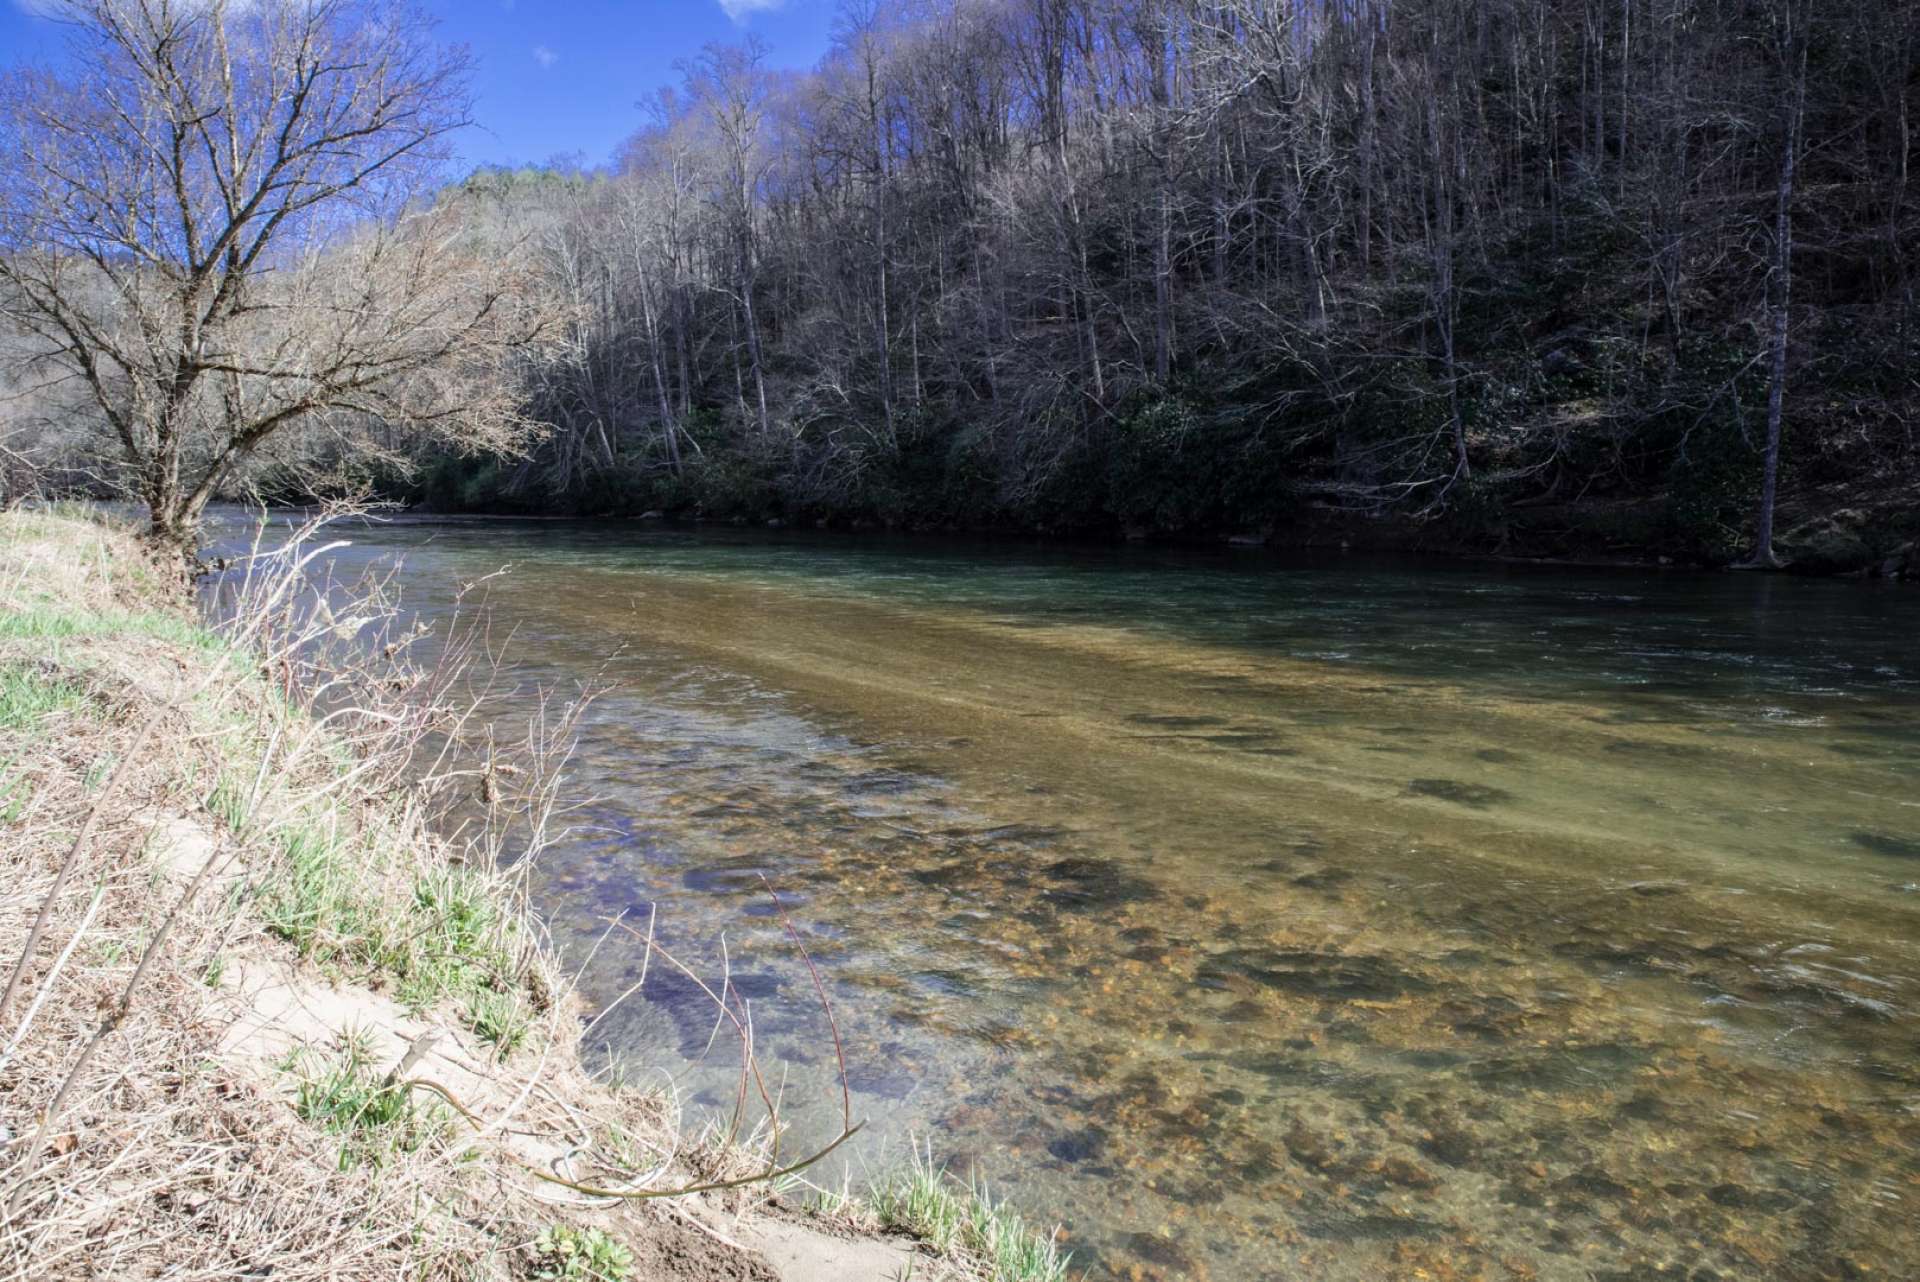 Call today for additional information on lot 38 of the Fox Hall community along the banks of the South Fork of the New River in the Laurel Springs area of Ashe County in the NC Mountains. Listing ID is W258-LE.